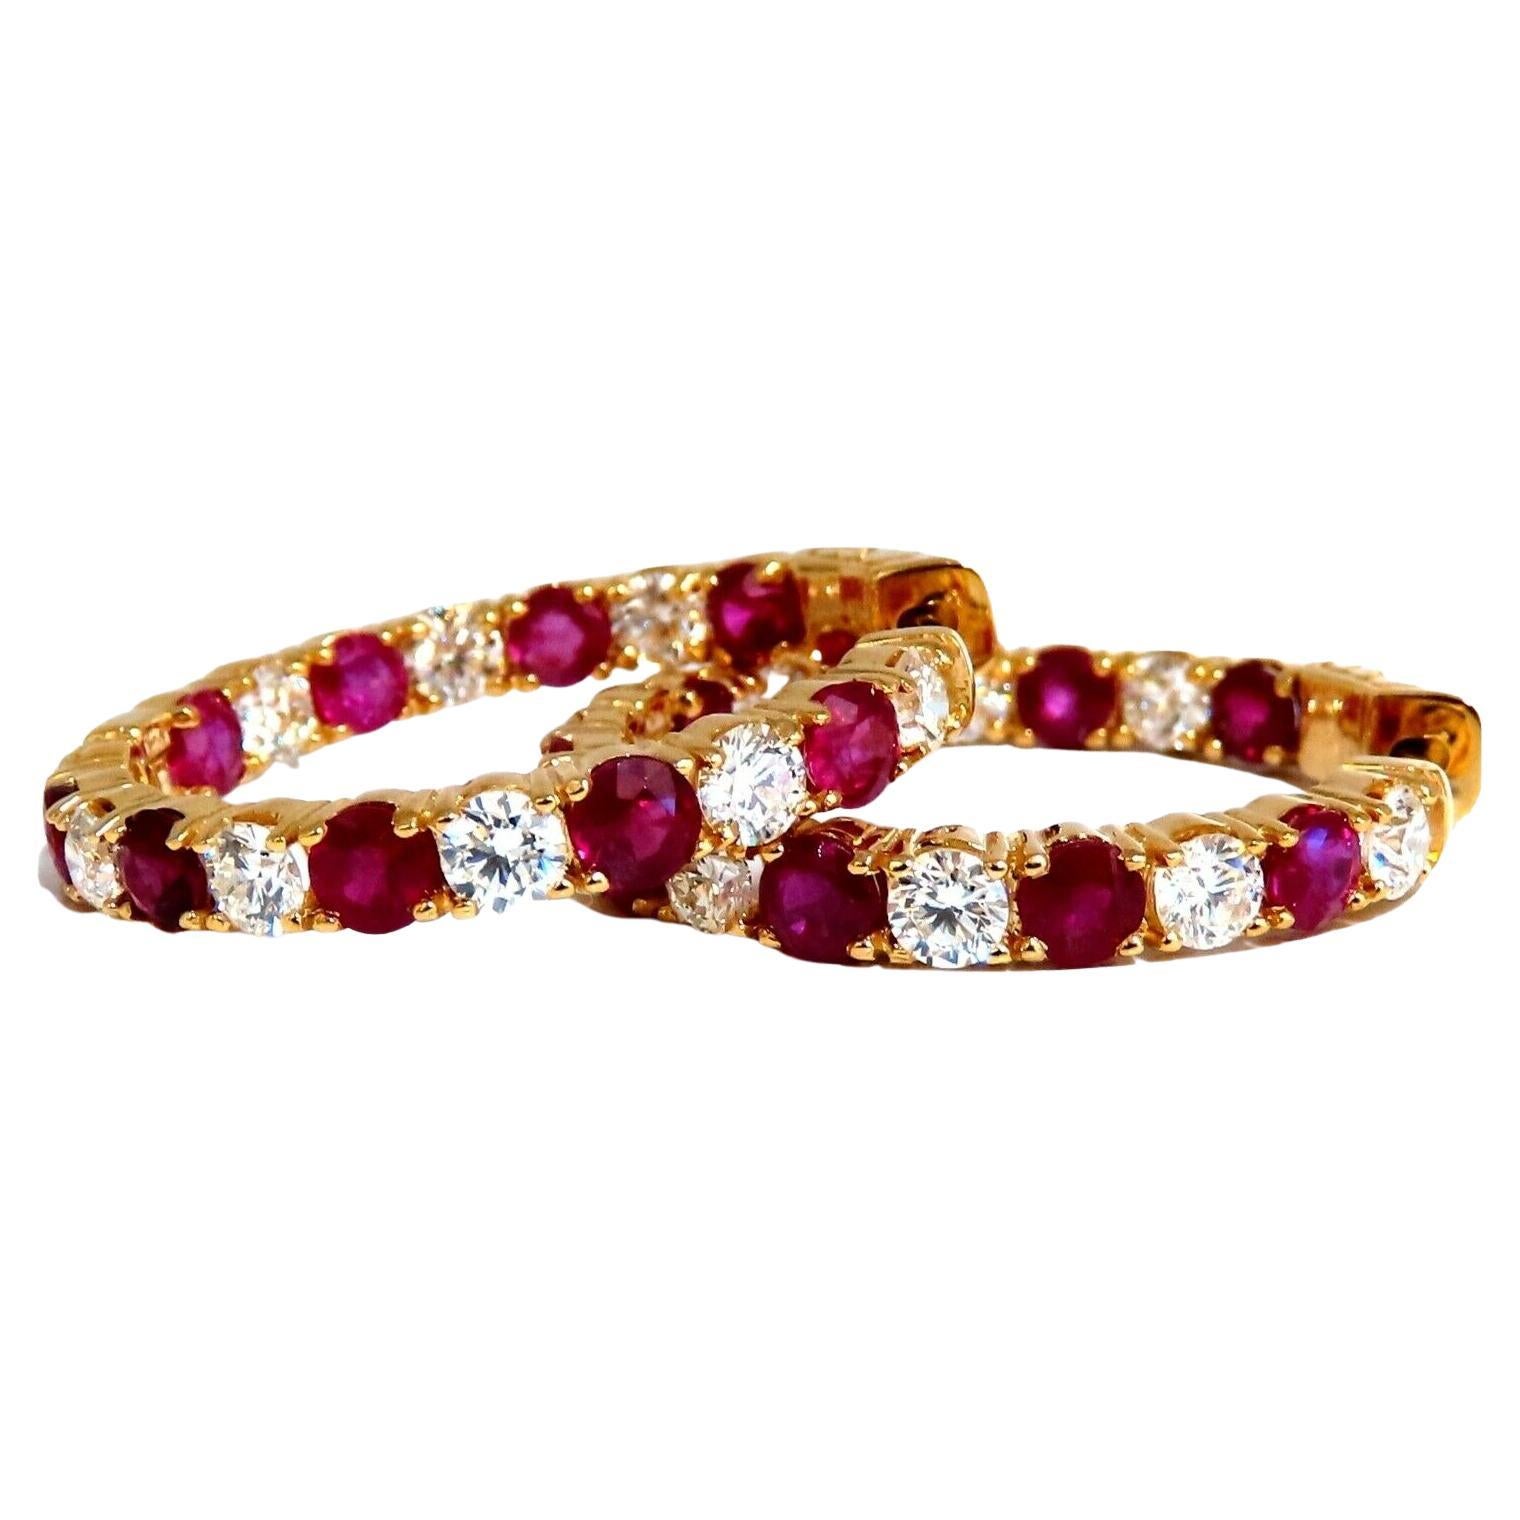 7.19ct Natural Ruby Diamonds Hoop Earrings 14kt Yellow Gold Inside Out For Sale